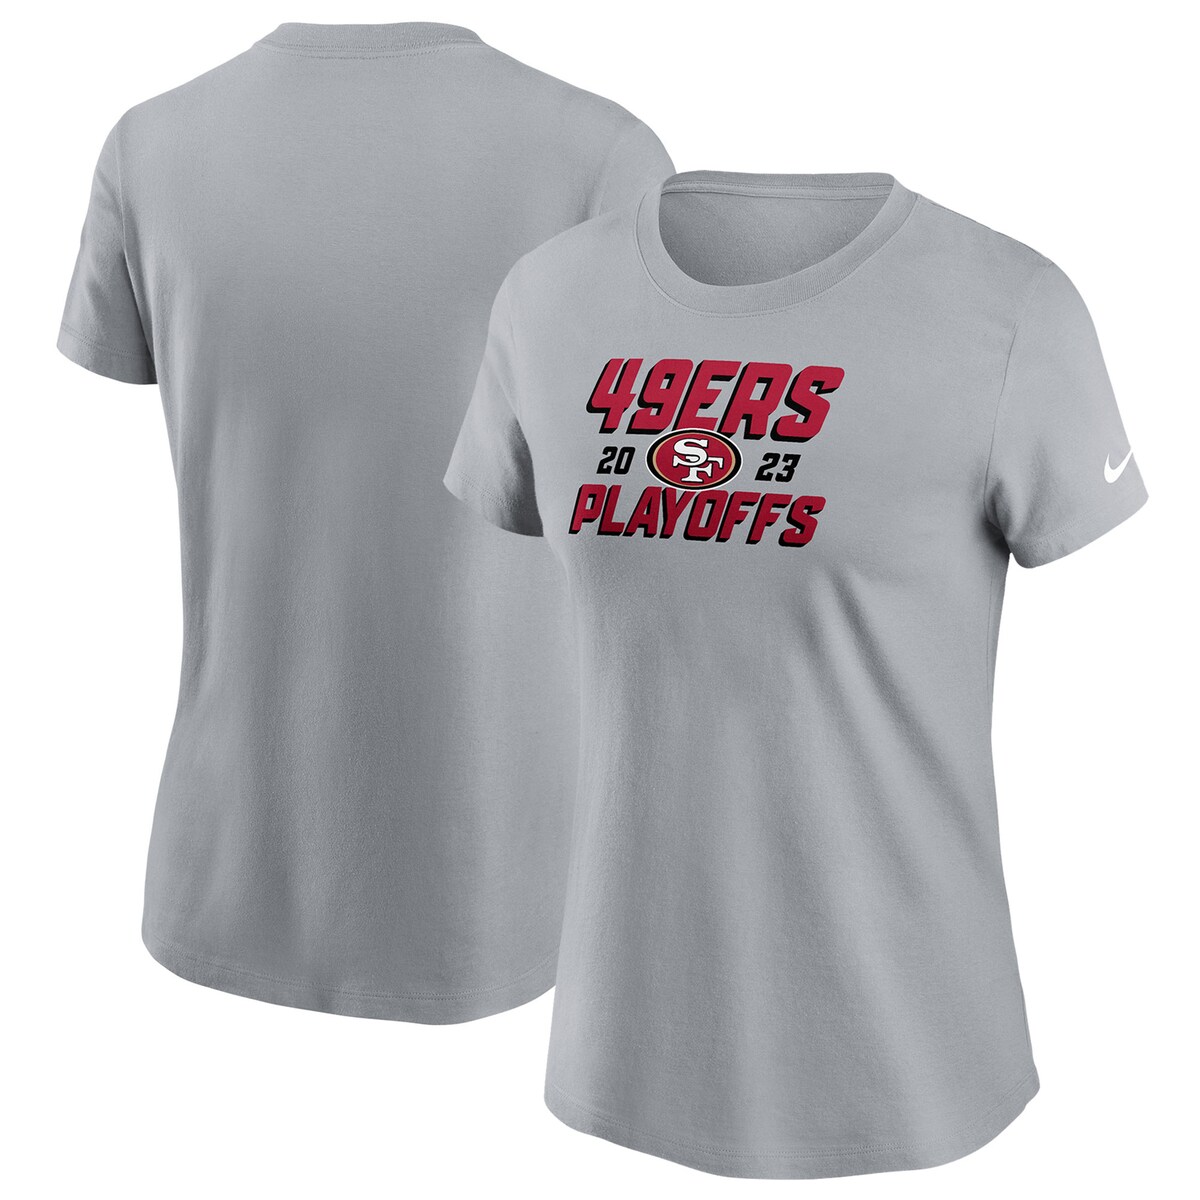 NFL 49ers Tシャツ Nike ナイキ レディース グレイ (23 Womens Nike Playoff Participant Iconic SS Tee)